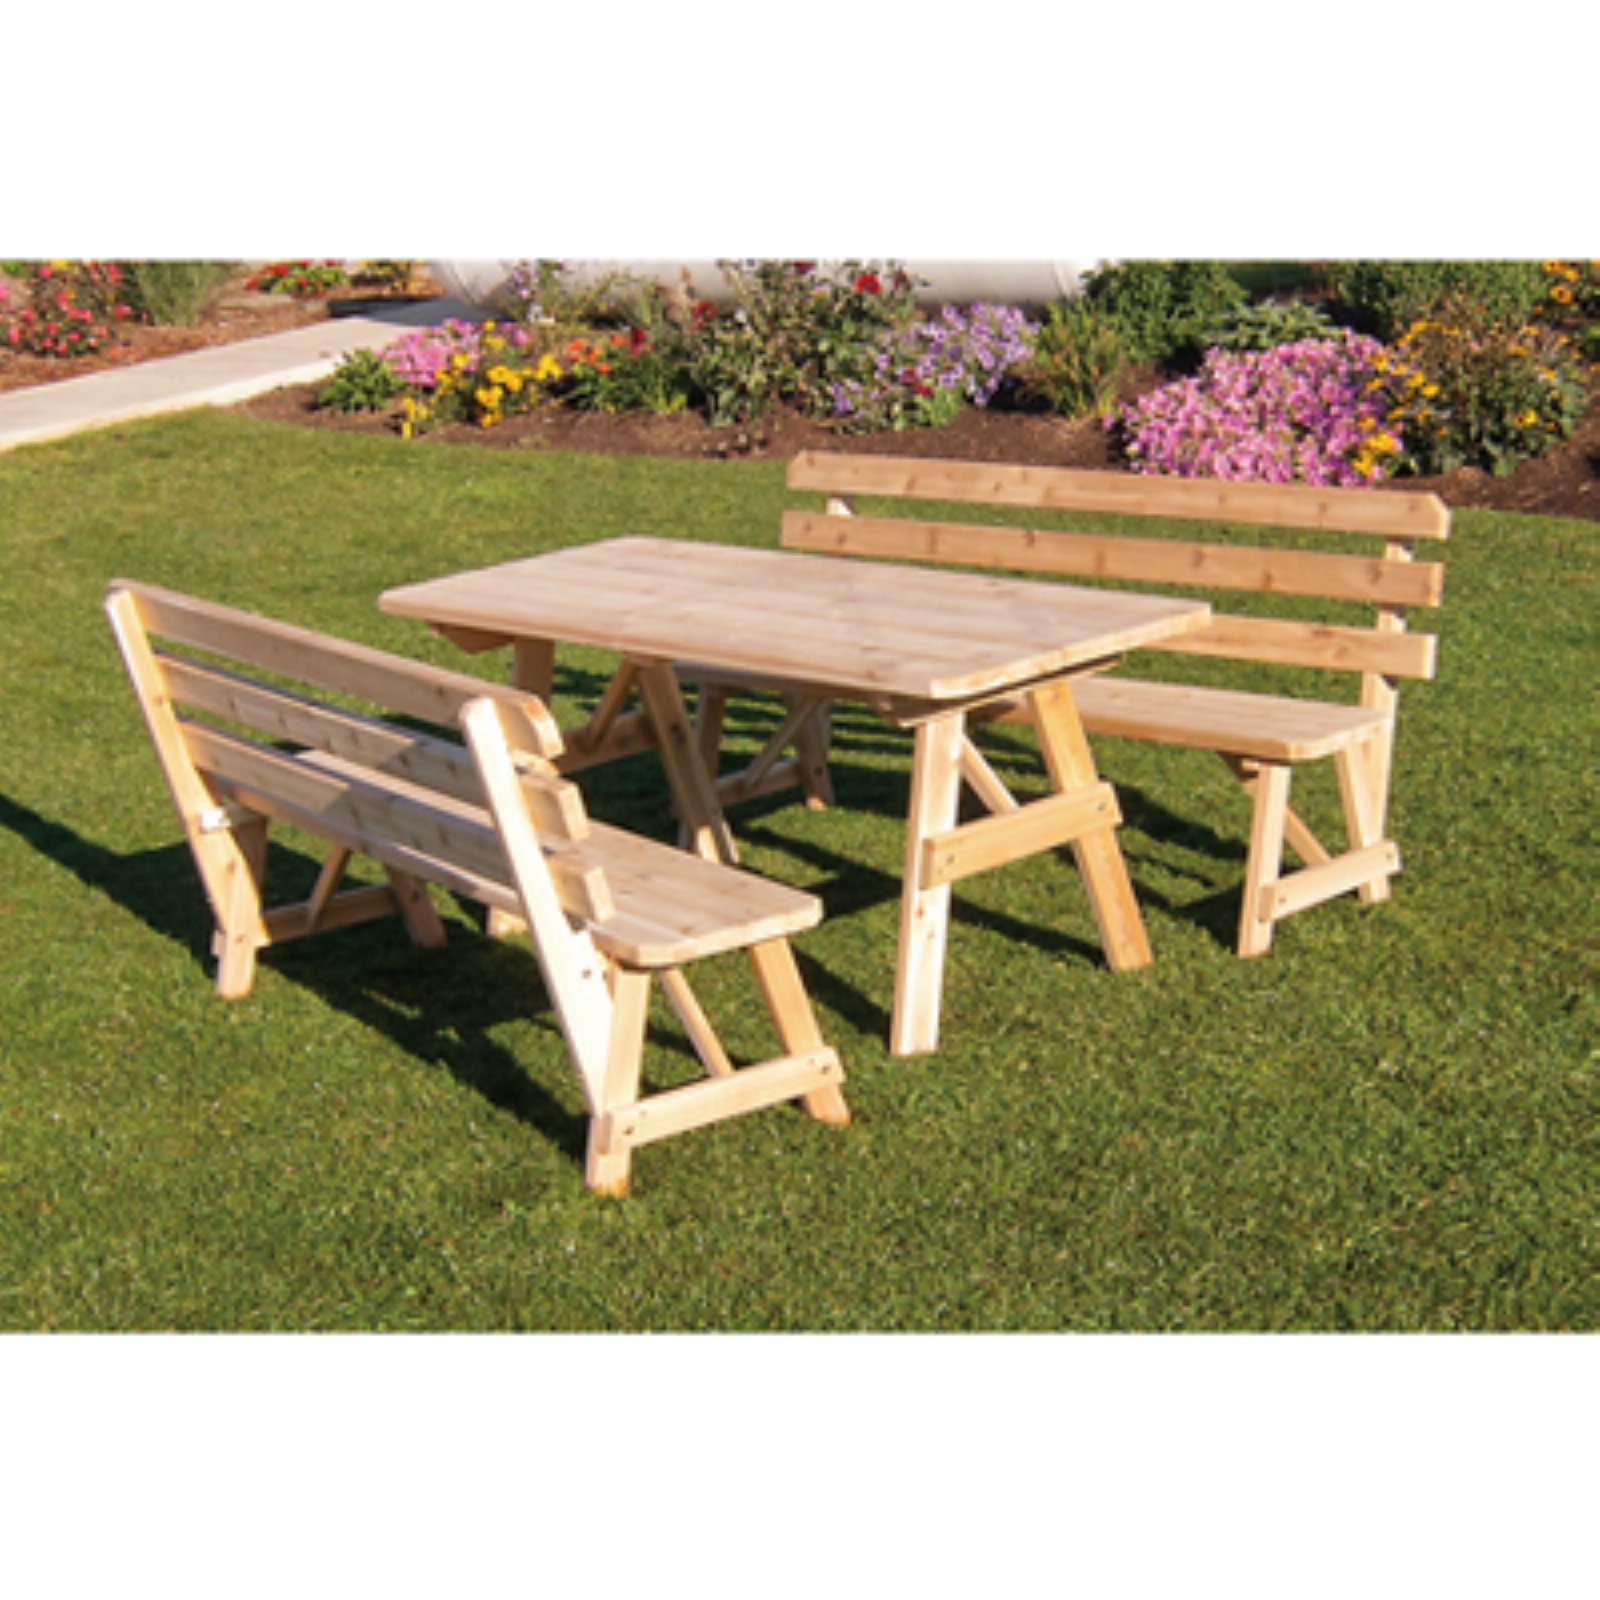 A &amp; L Furniture Western Red Cedar Picnic Table with 2 Backed Benches - image 1 of 1